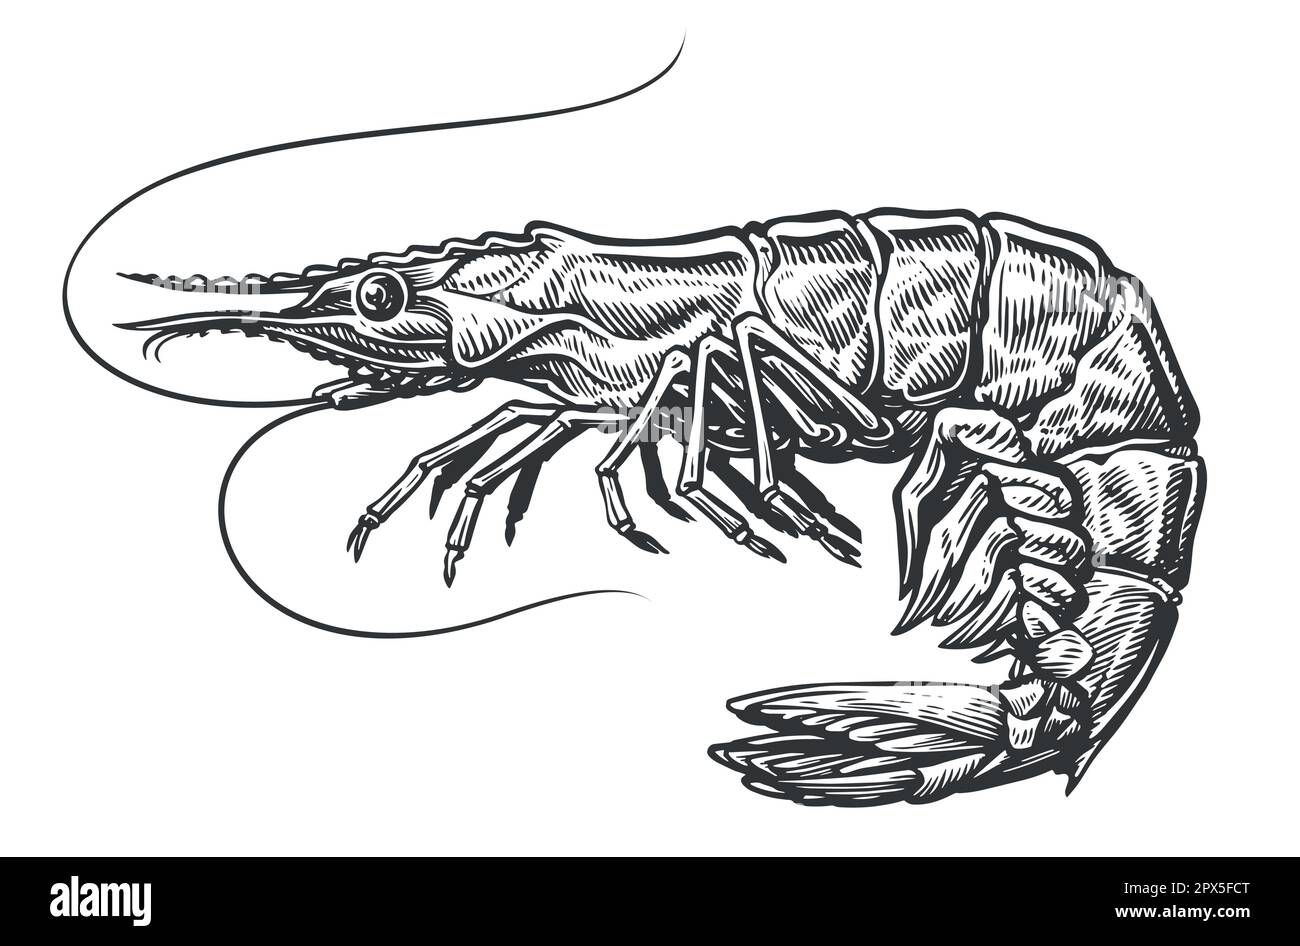 Shrimp engraving style sketch. Whole prawn, seafood hand drawn vector illustration Stock Vector